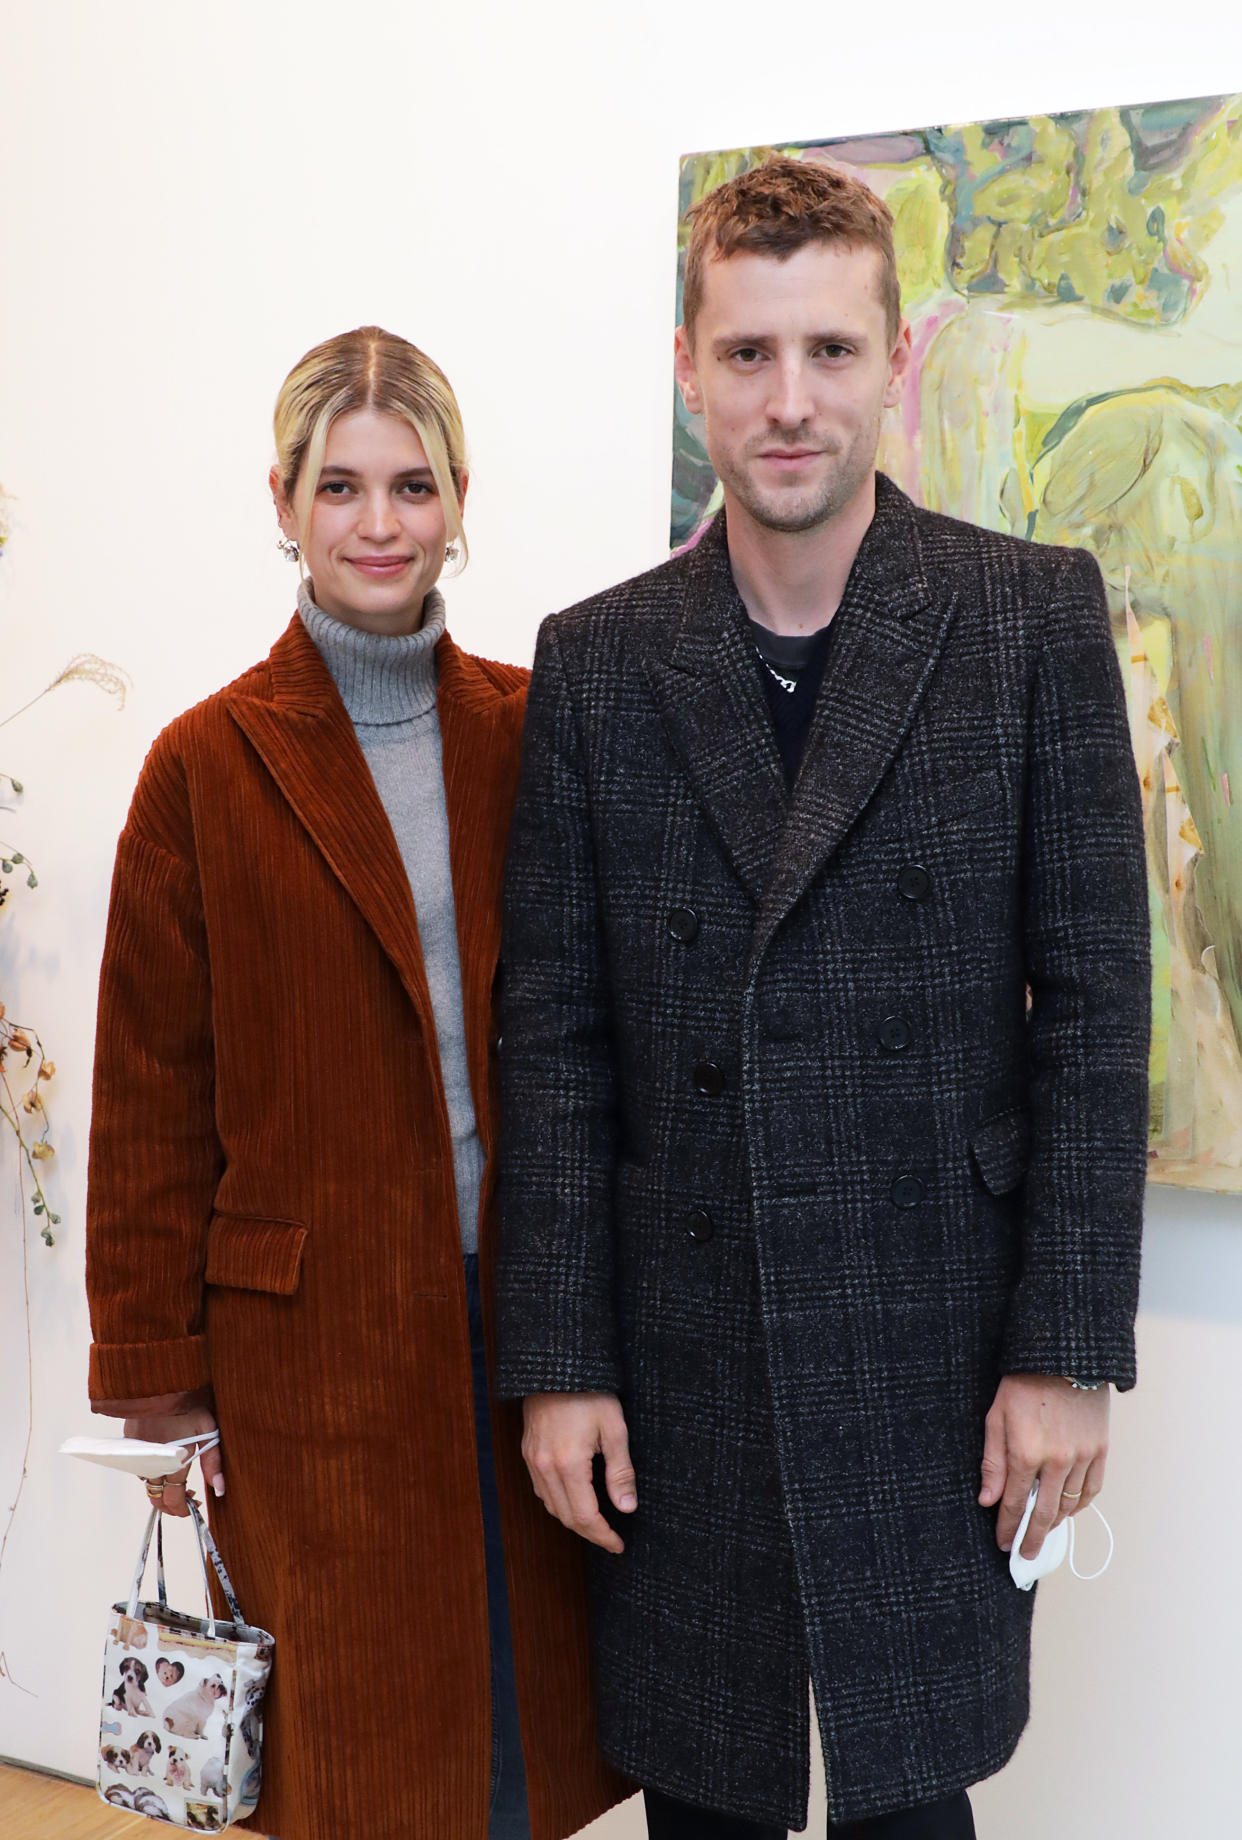 The model is expecting her first child with husband George Barnett. (Getty Images)